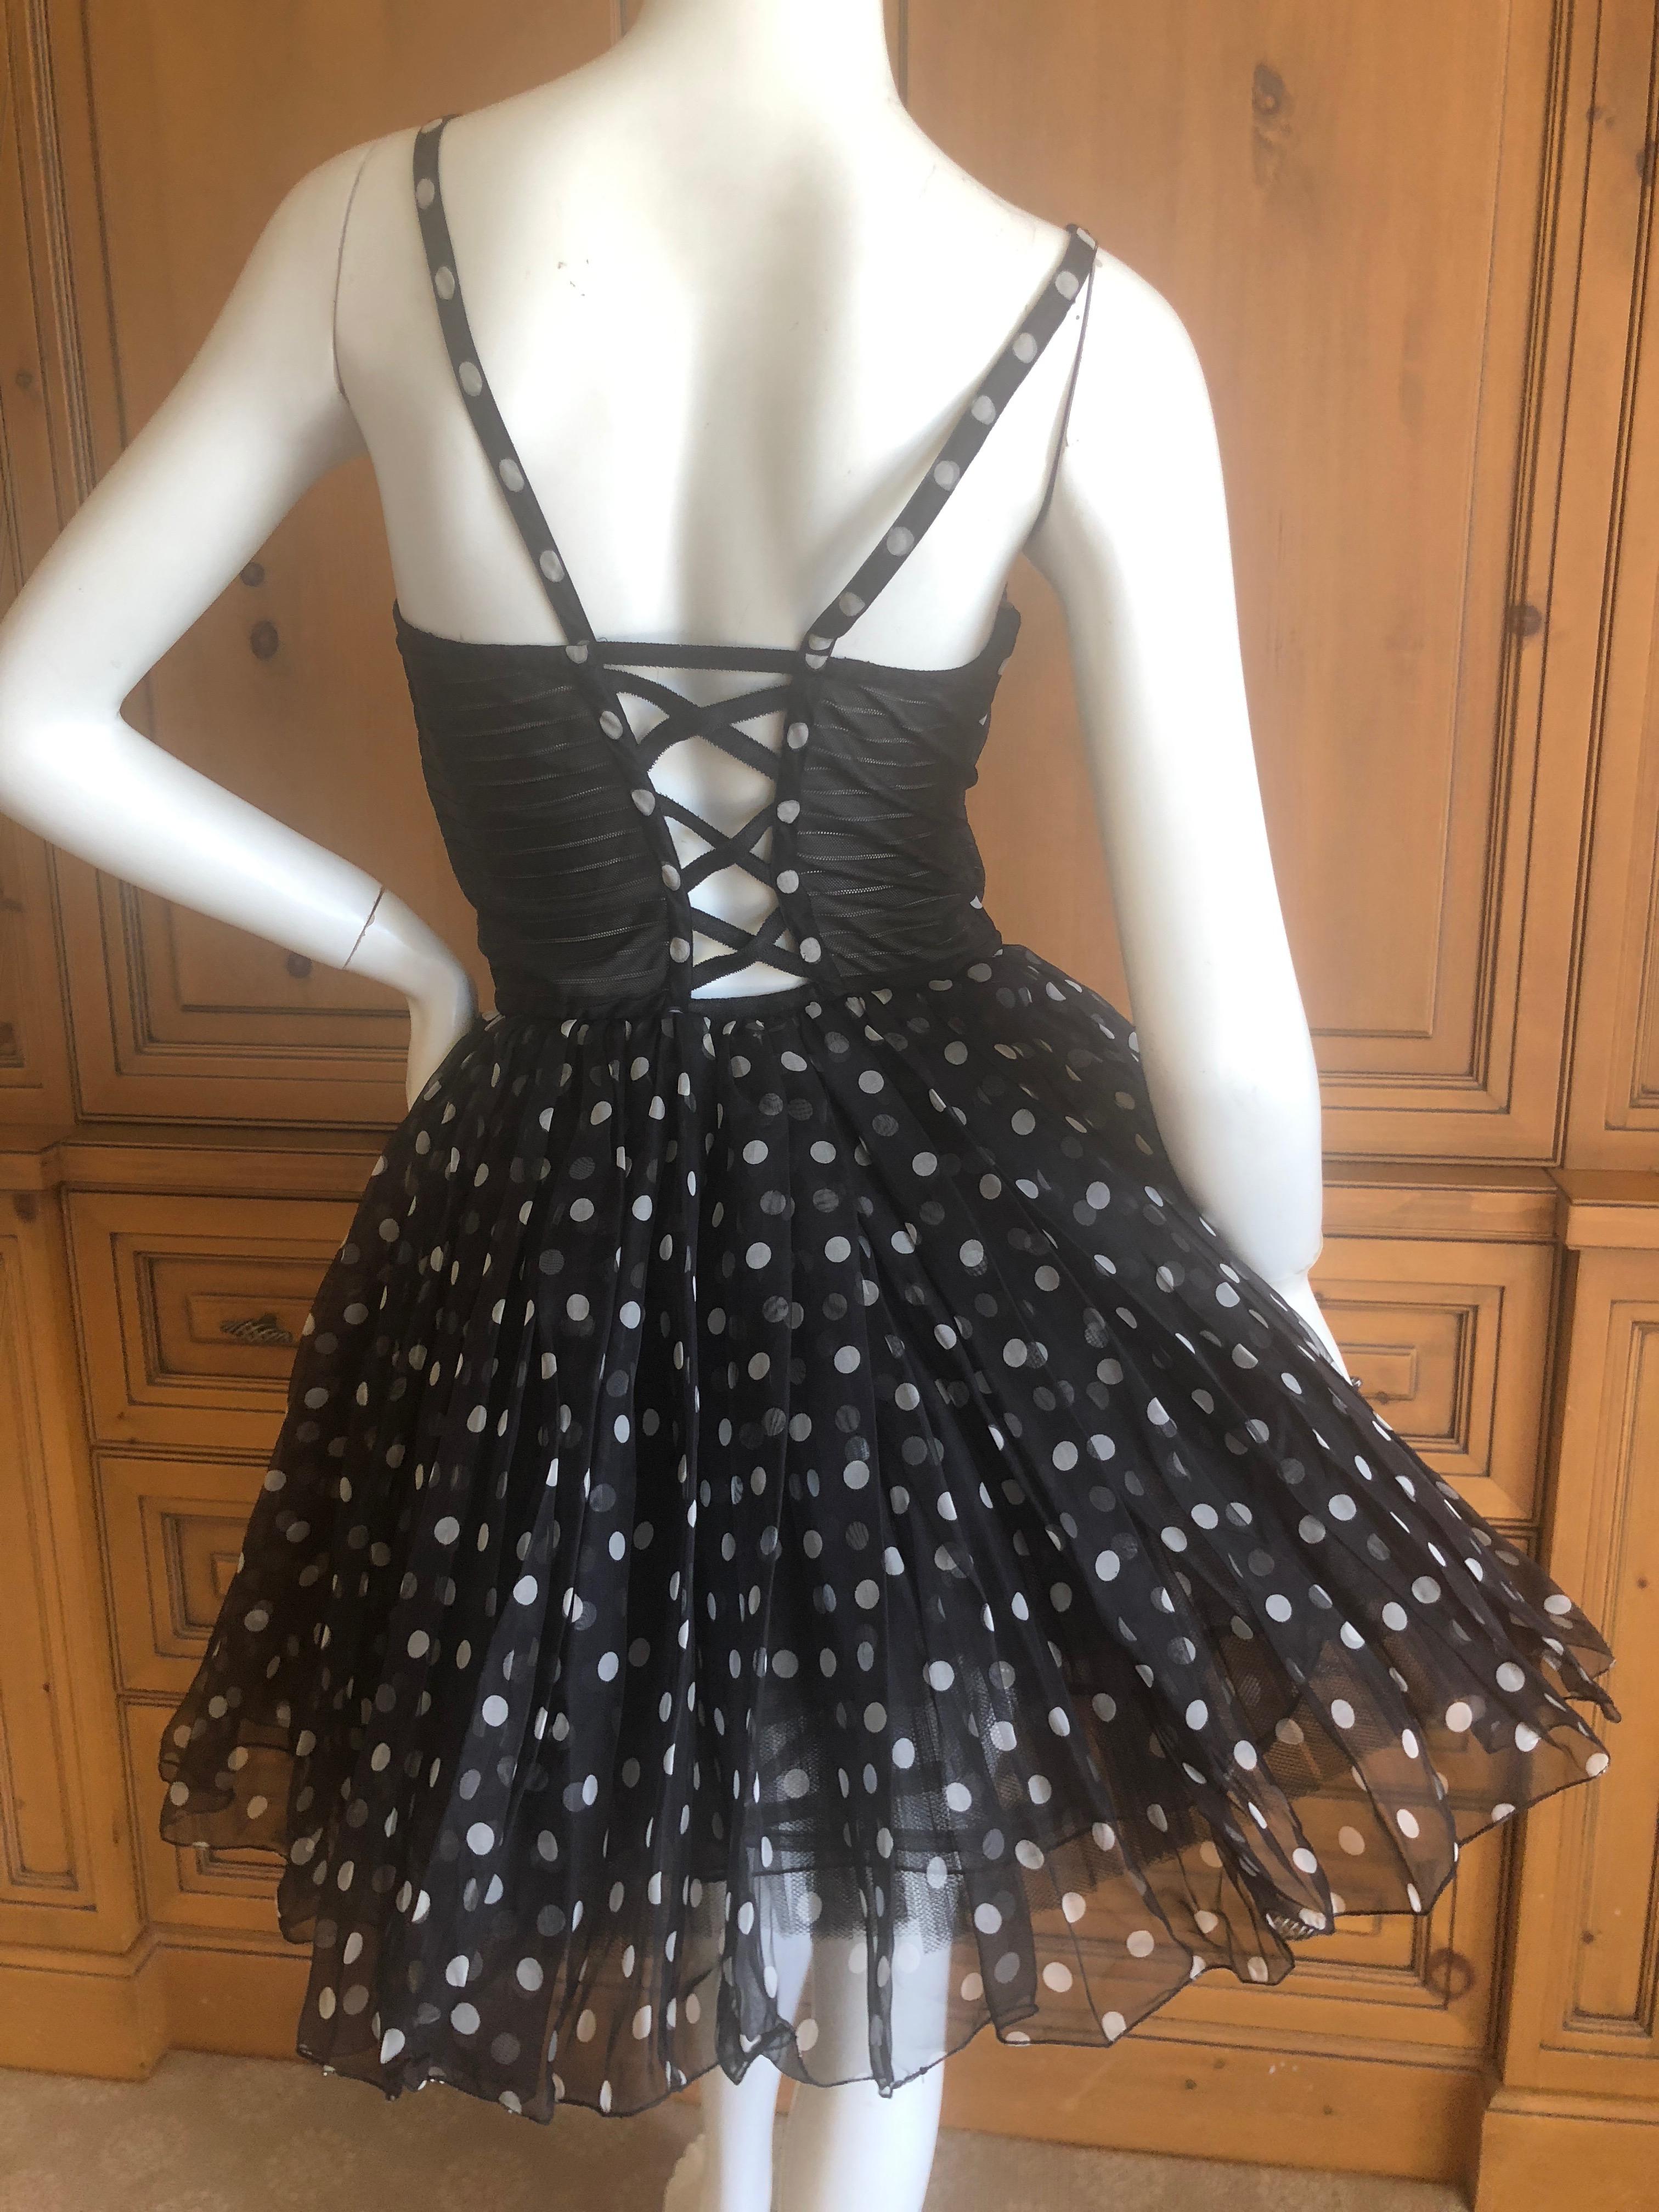 Christian Dior Gianfranco Ferre Numbered Demi Couture Corset Ballerina Dress
I believe this is from 1992.
Sheer boned corset with ballerina skirt with five layers of petticoats
Size 38
Bust 34